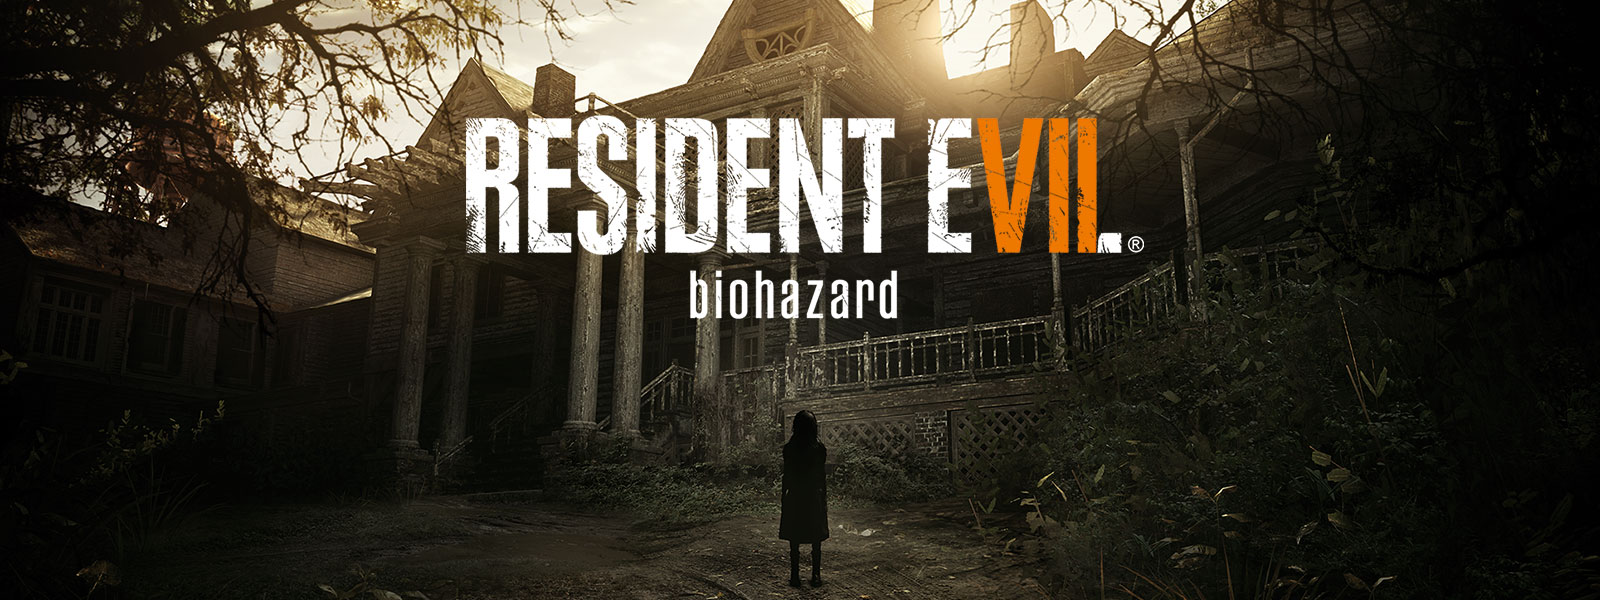 Resident Evil 7 Biohazard Gold Edition boxshot over scene of spooky girl standing in front of haunted house